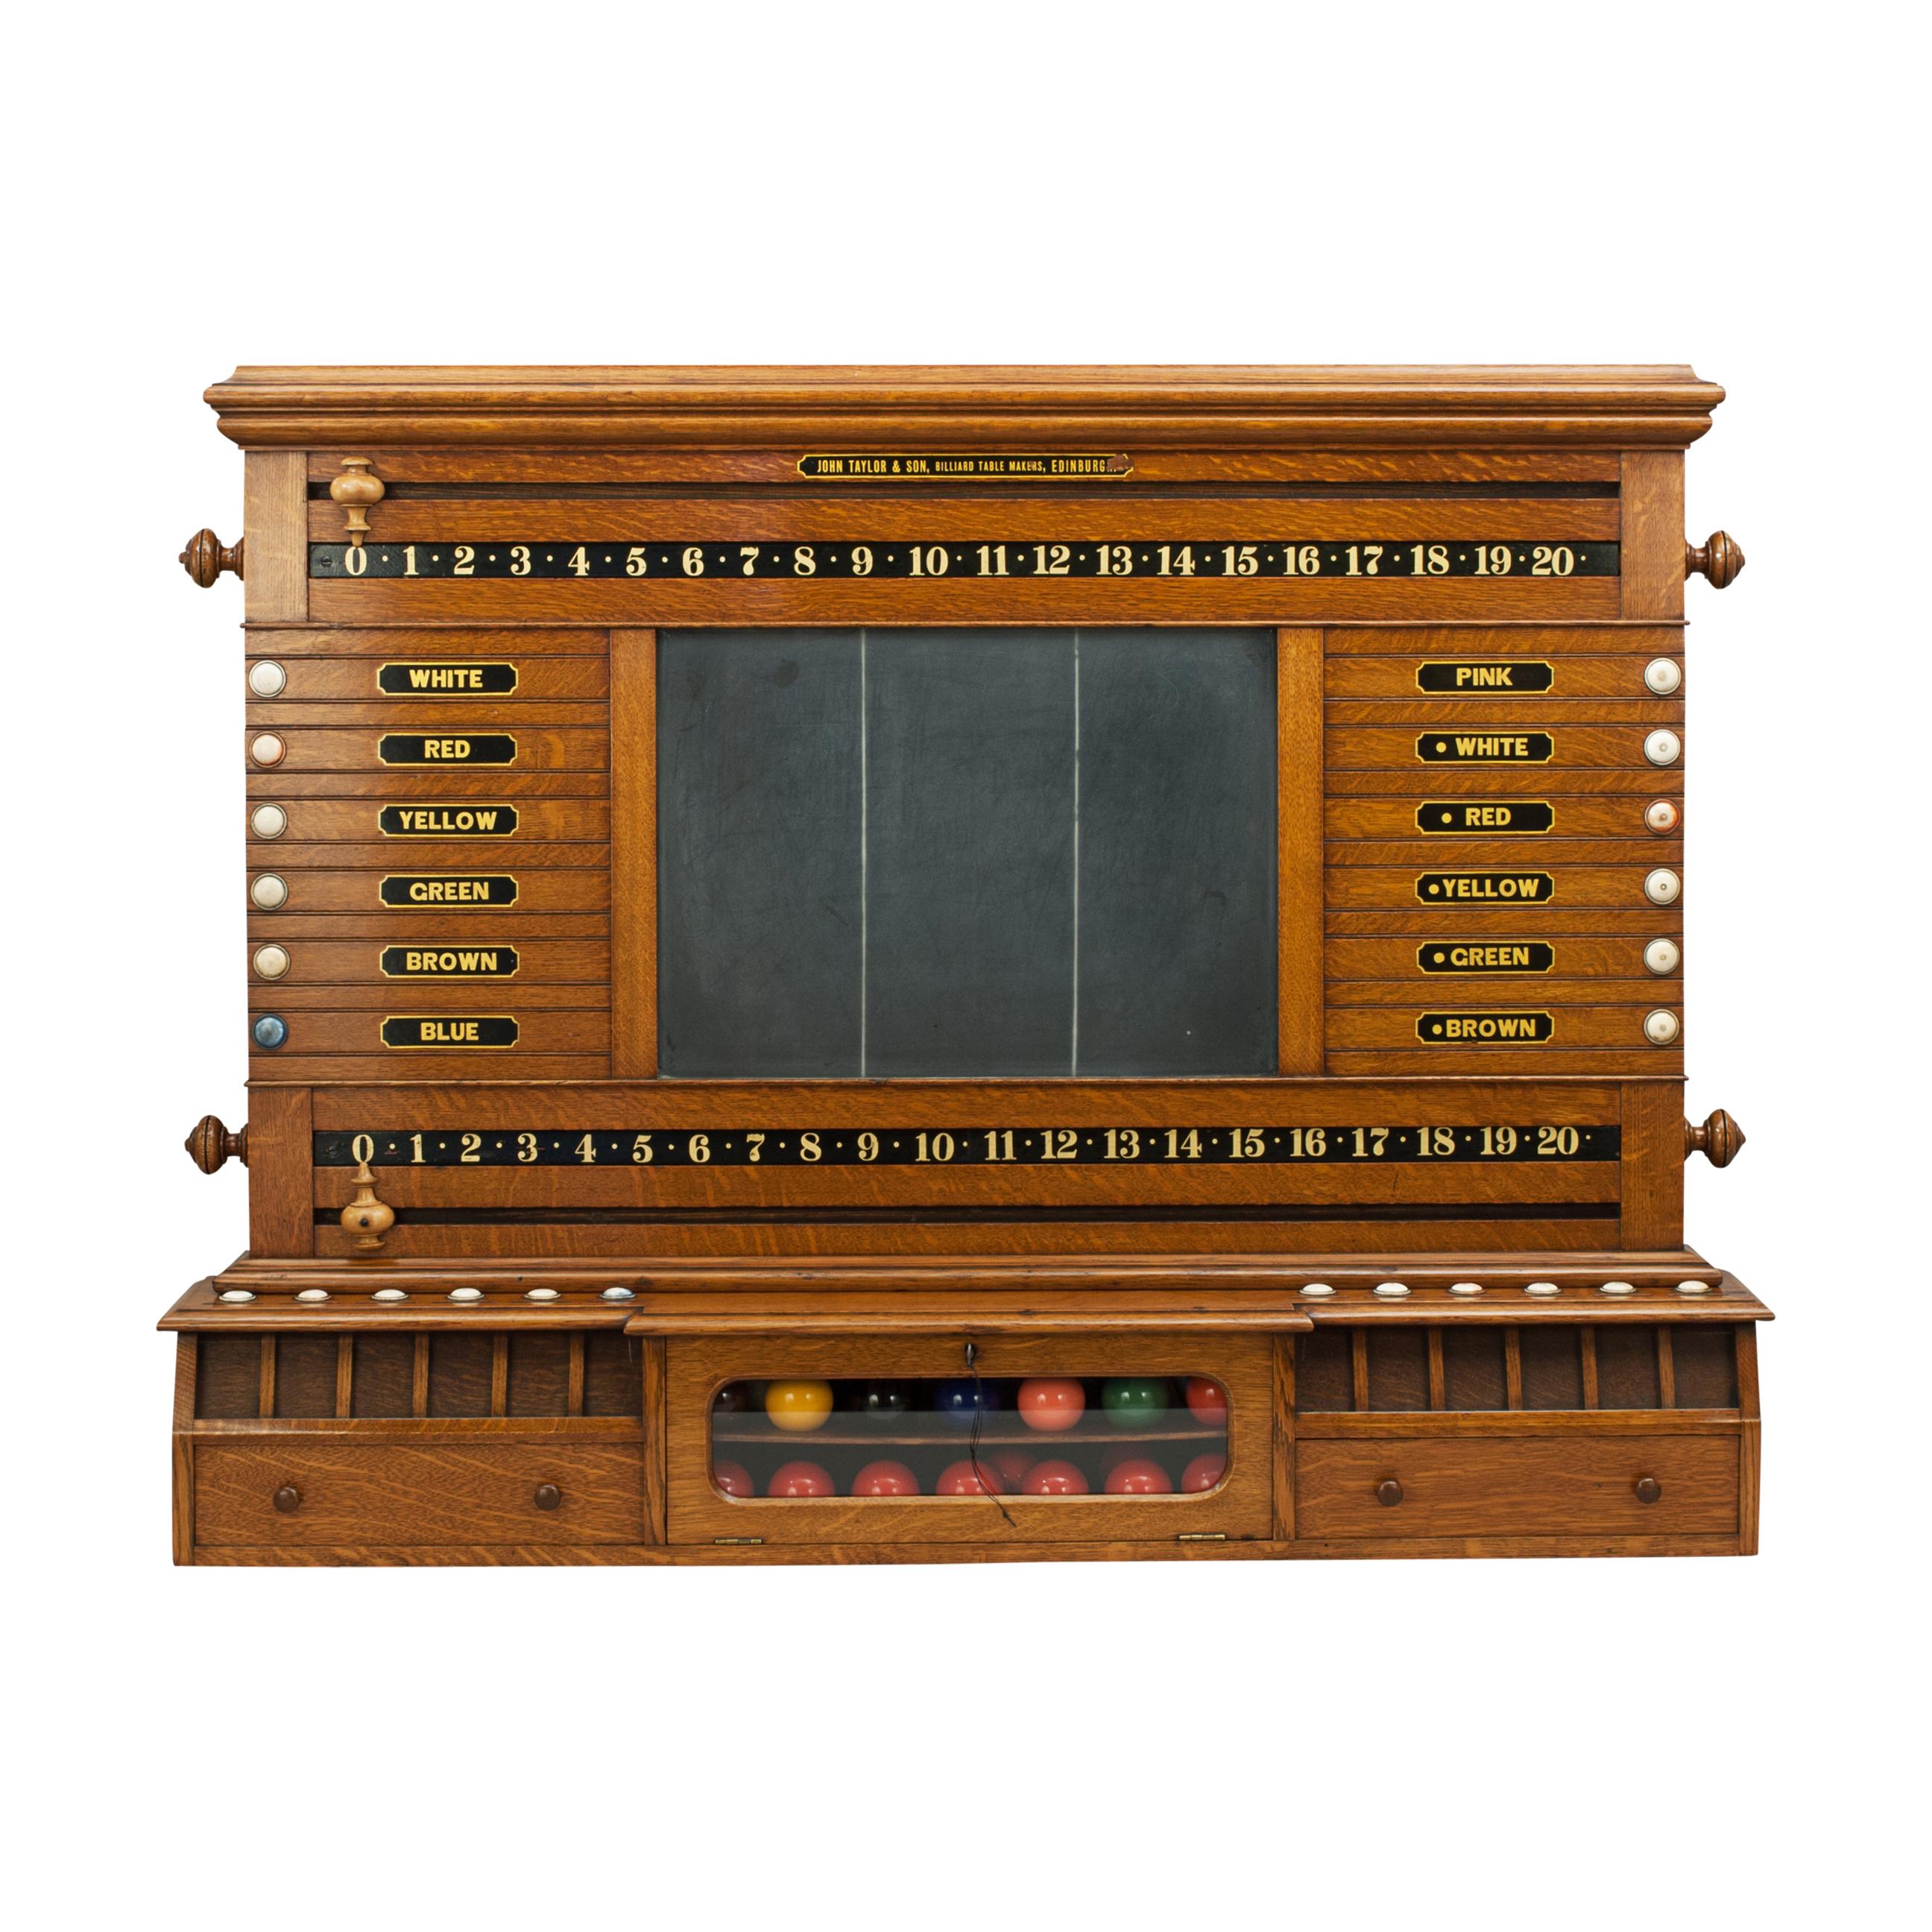 John Taylor & Son snooker score board, life pool, ball cabinet.
A nice combined billiards and life pool scoreboard made of oak by John Taylor & Son, Edinburgh. The billiard scorer sits upon a lockable ball cabinet that can house 28 balls. The